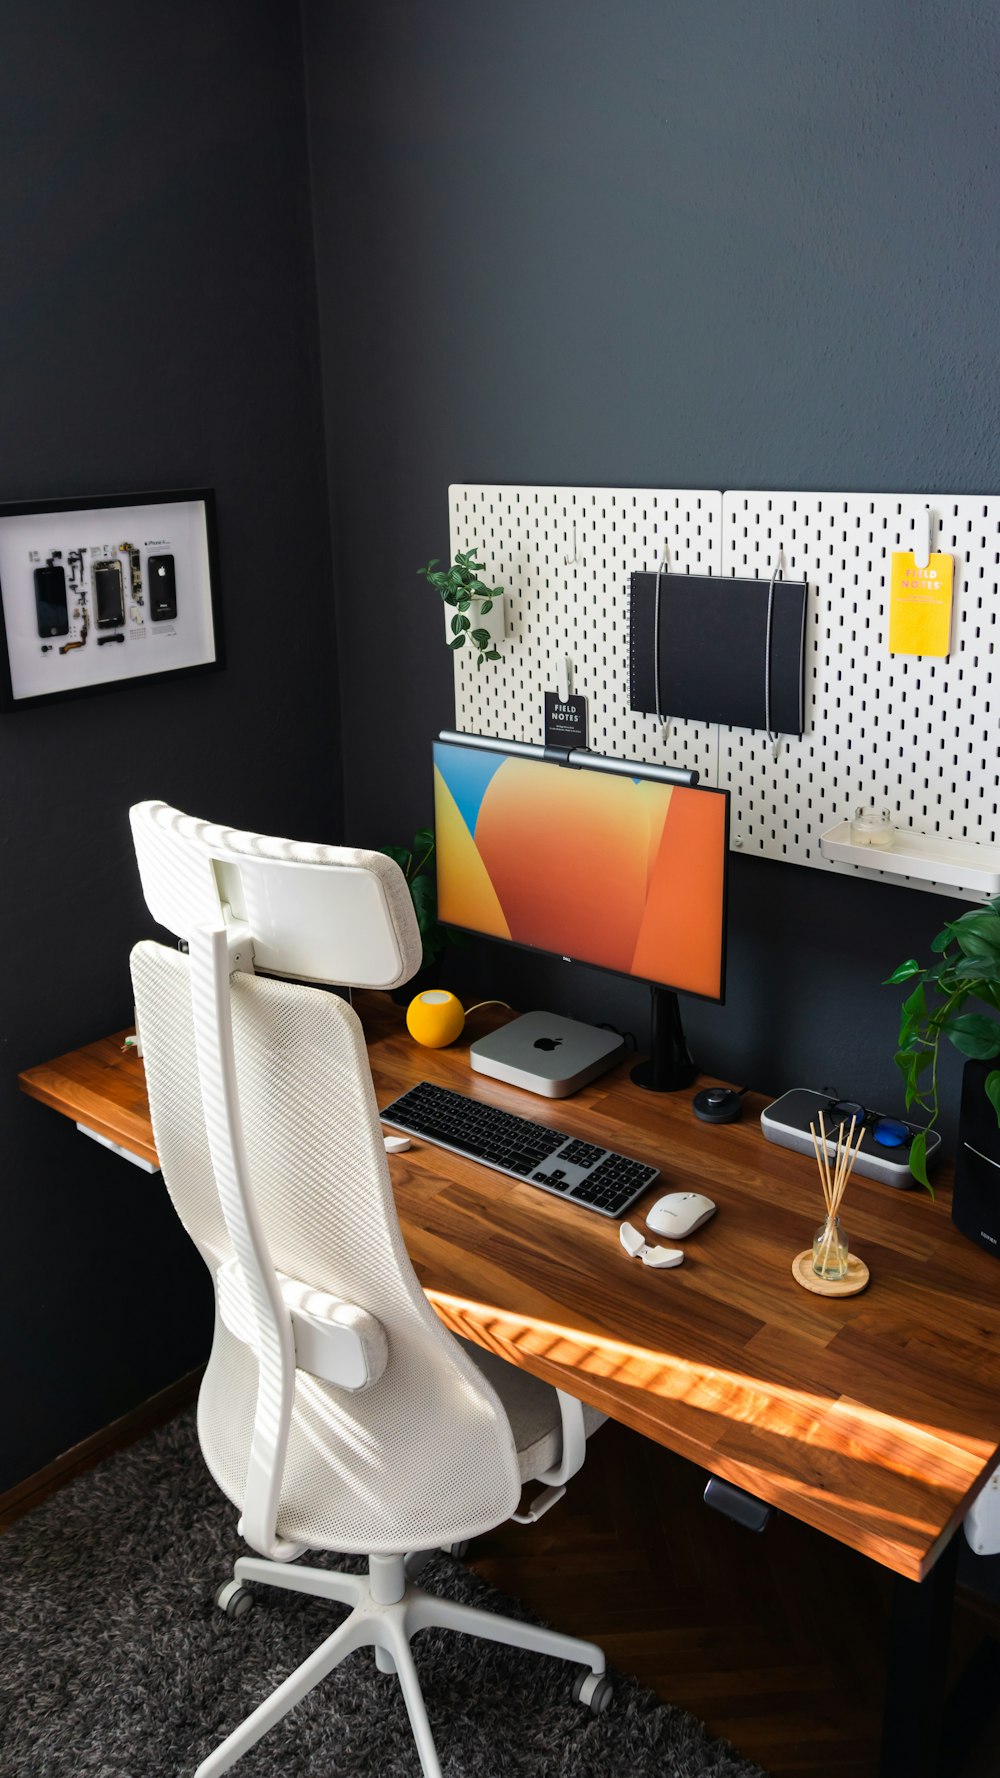 a desk with a computer, keyboard, mouse and plant